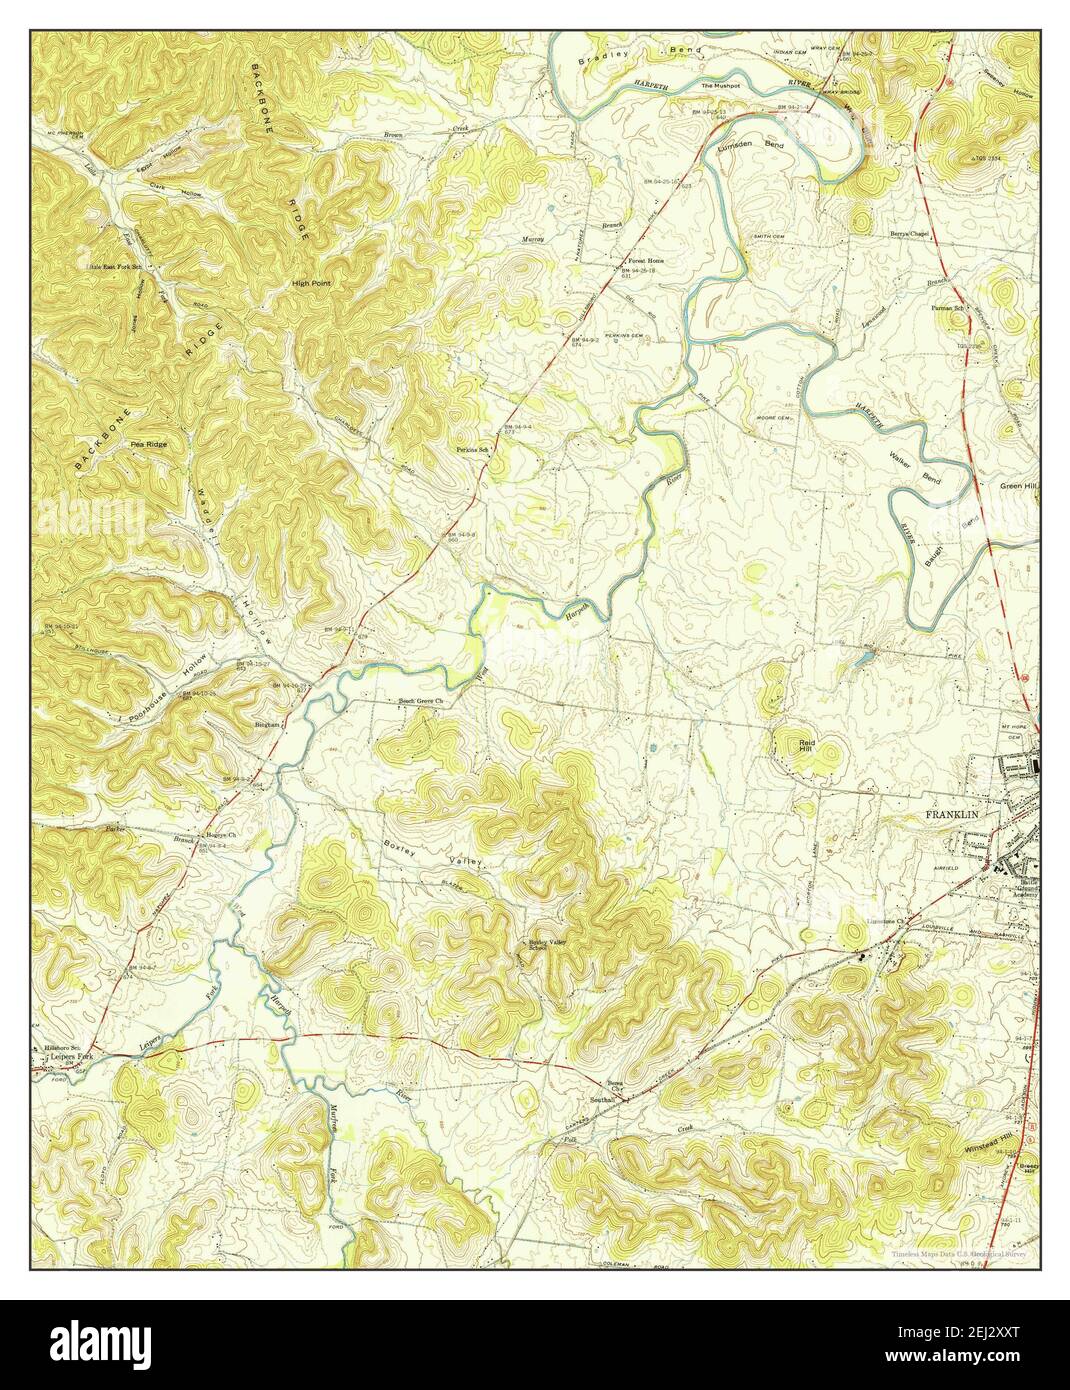 Leipers Fork, Tennessee, map 1949, 1:24000, United States of America by Timeless Maps, data U.S. Geological Survey Stock Photo